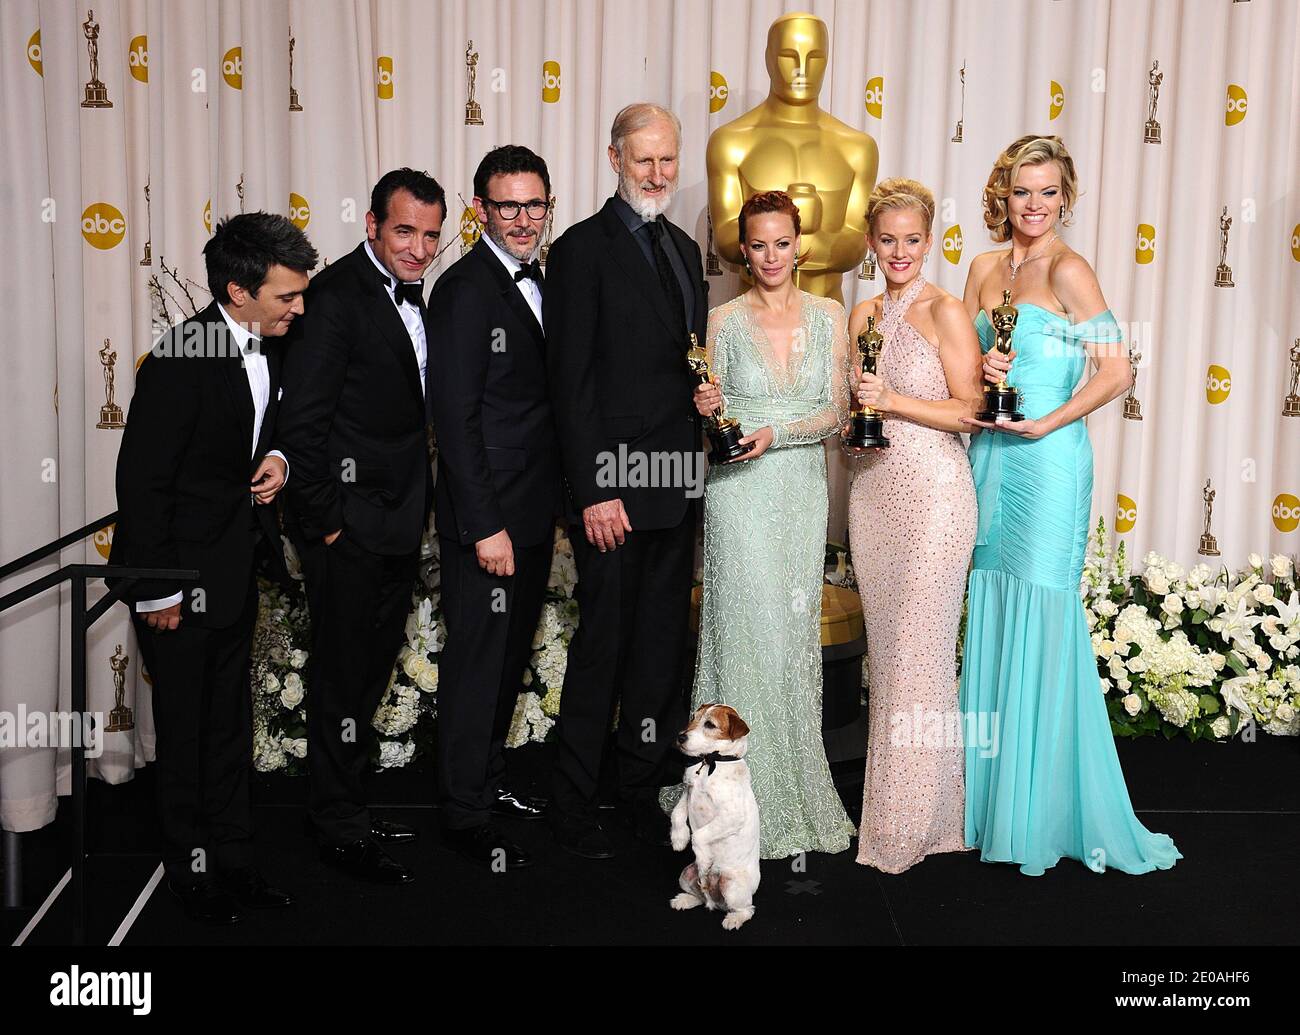 Cast and crew members of The Artist with their awards pose in the press room at the 84th Annual Academy Awards held at the Kodak Theatre in Los Angeles, CA, USA on February 26, 2012. Photo by Lionel Hahn/ABACAPRESS.COM Stock Photo